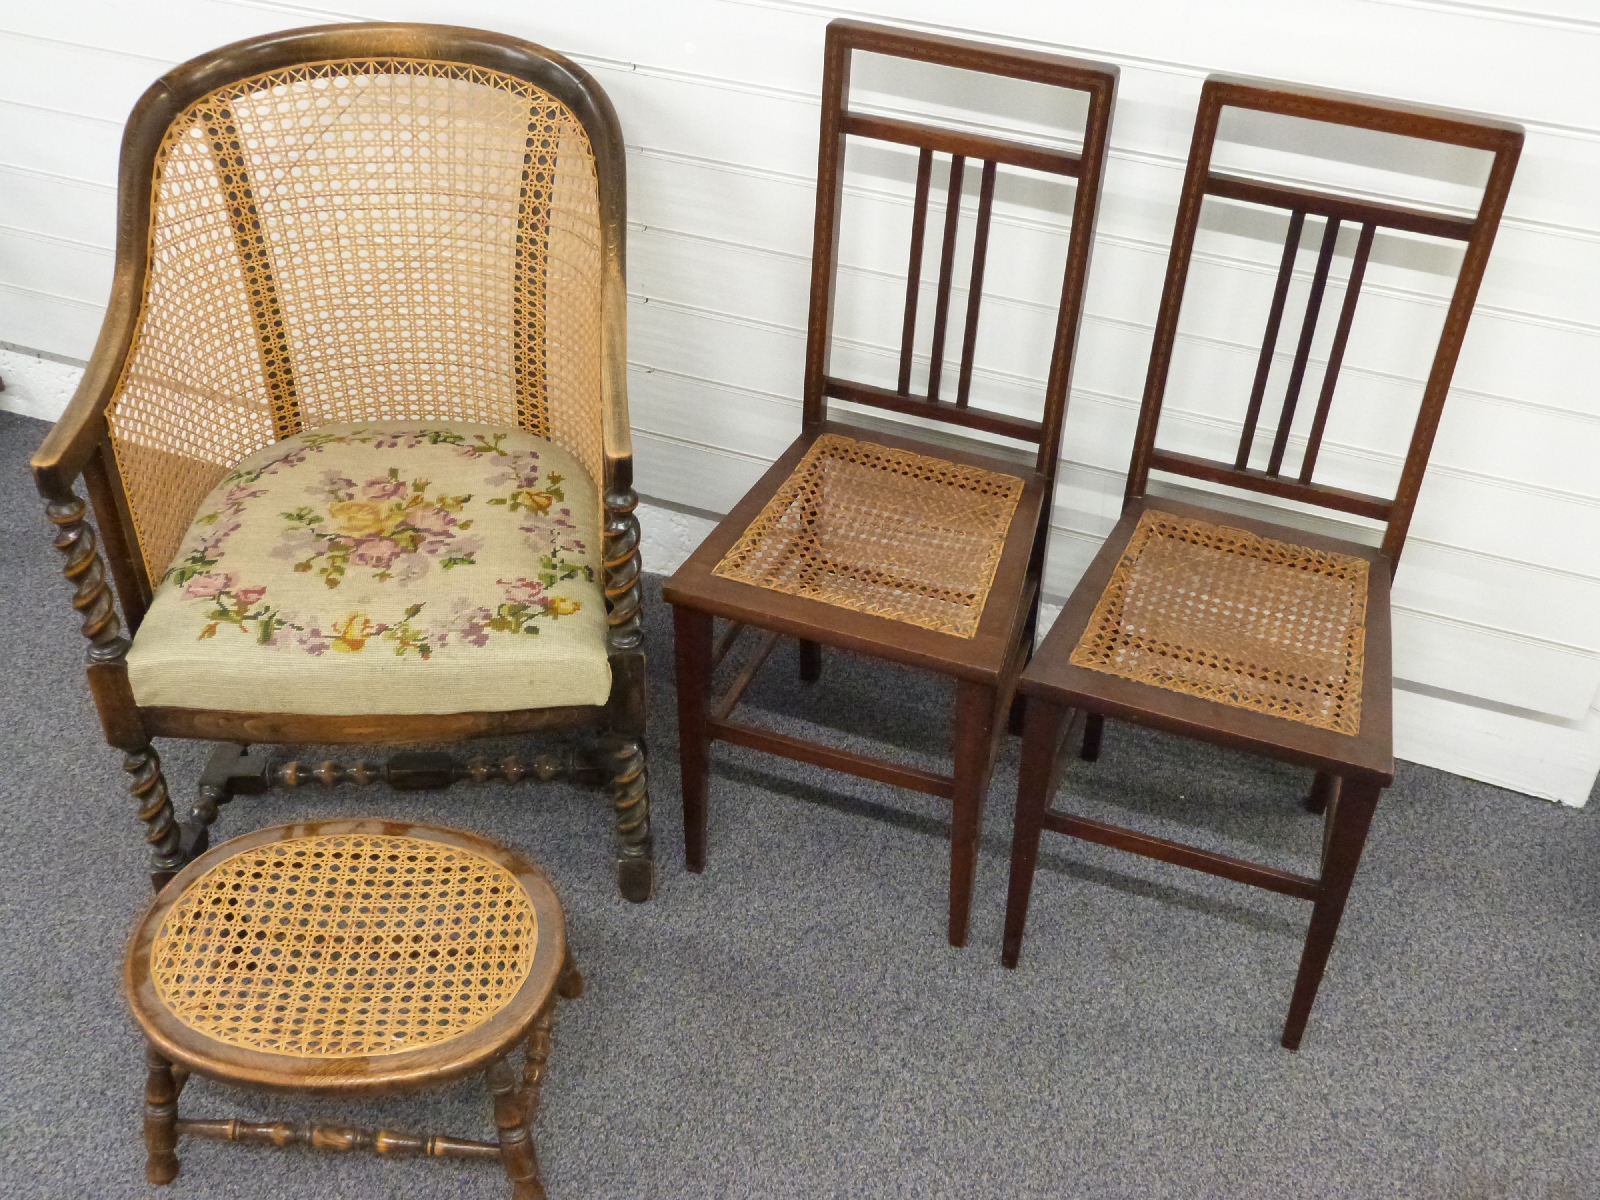 Three bergere chairs, one with tapestry upholstery, barley twist legs and a footstool - Image 2 of 2